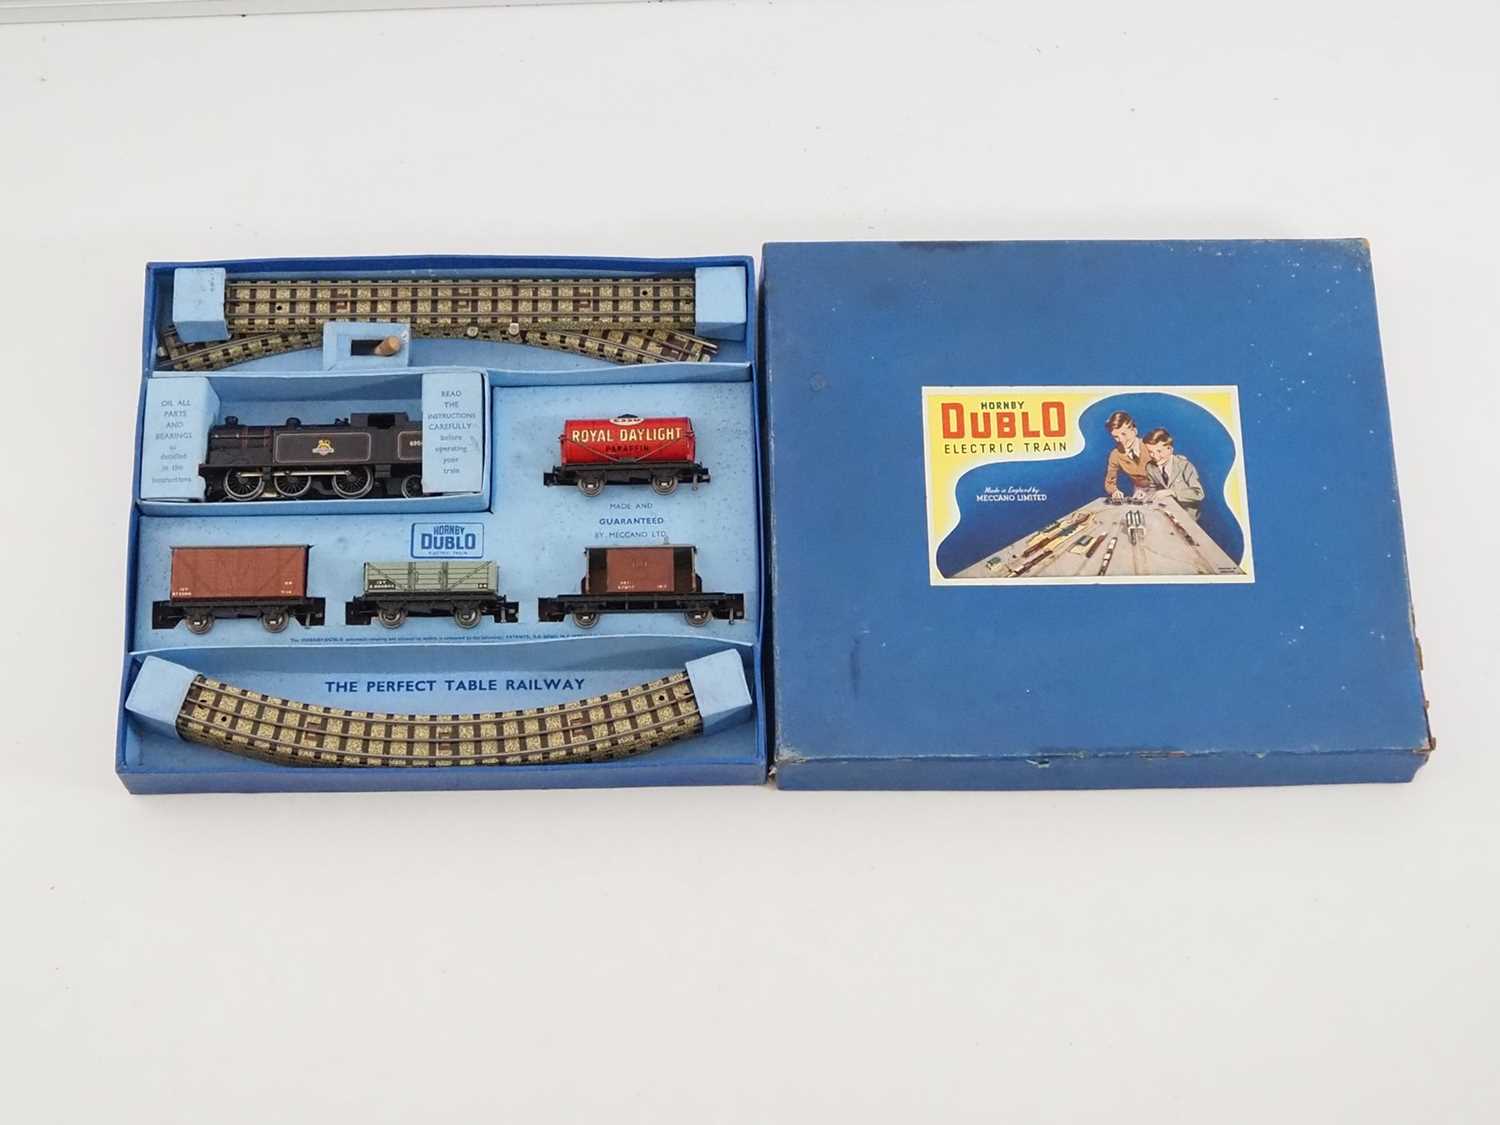 A HORNBY DUBLO OO gauge EDG17 0-6-2 Tank Goods Train set, appears complete - G/VG in G box